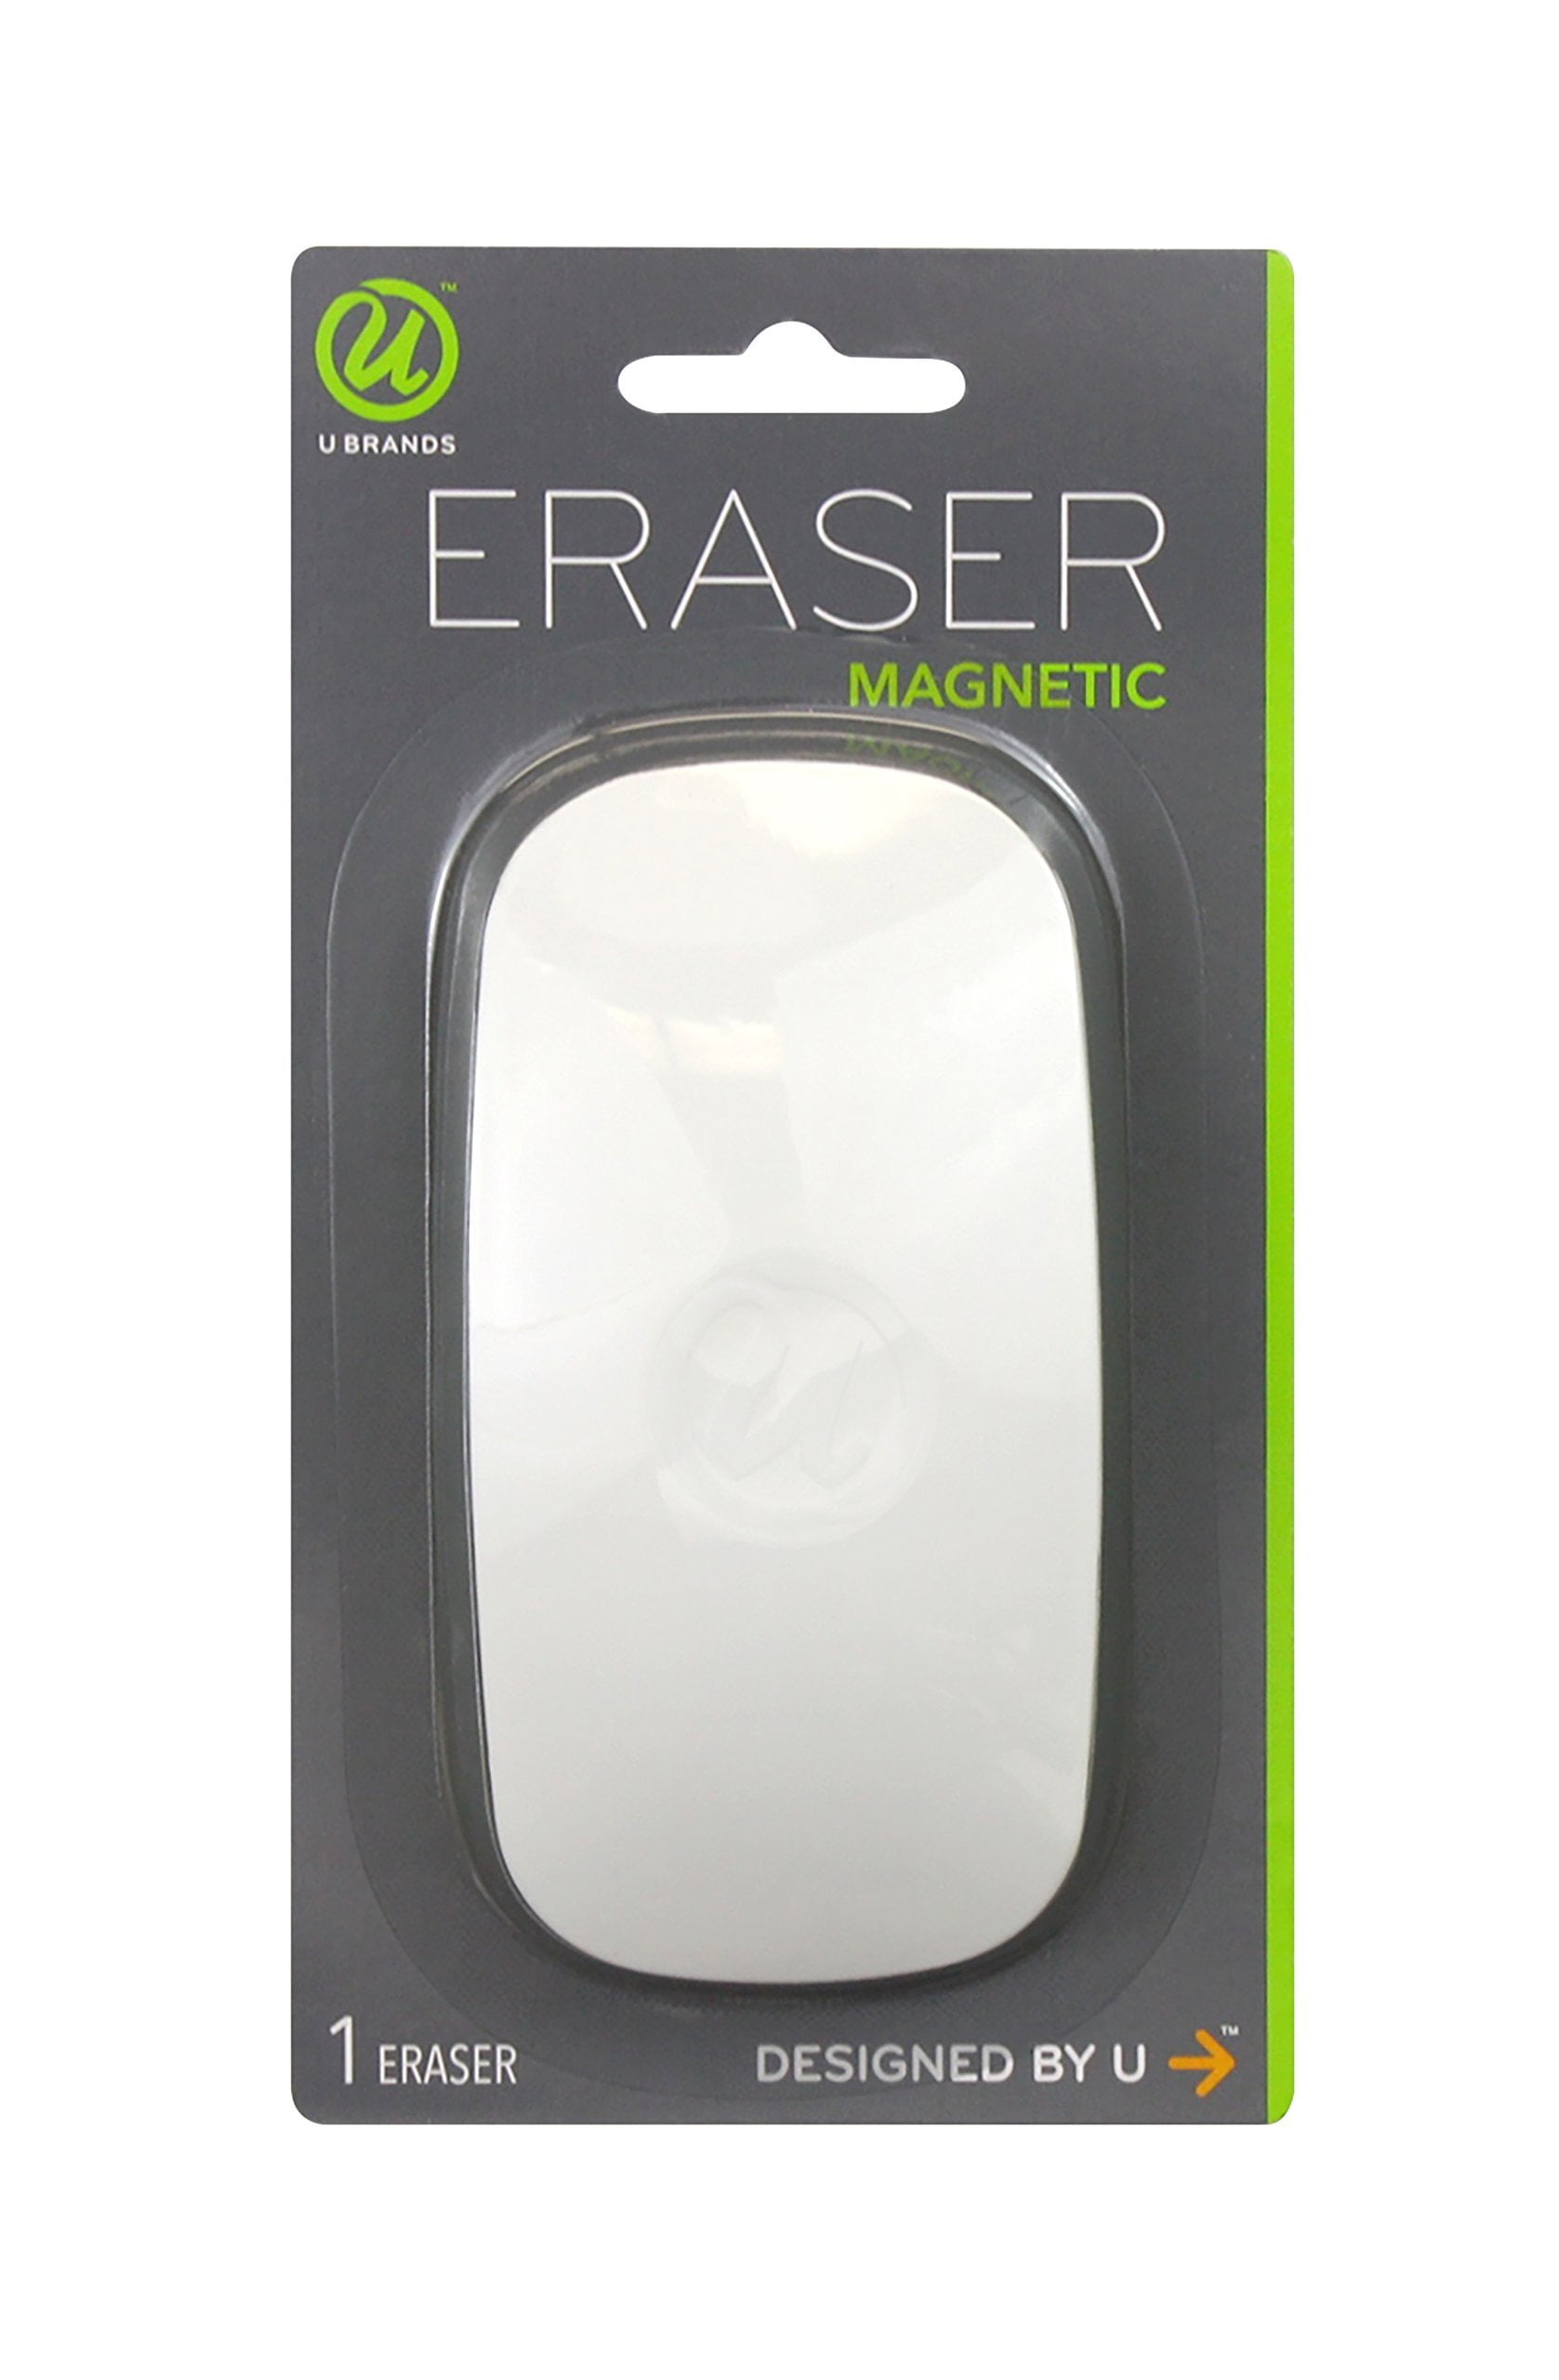 Magnetic Dry Erase Board Eraser 4.5 x 2.25 x 1 Inches Limited Edition Felt Bottom Surface